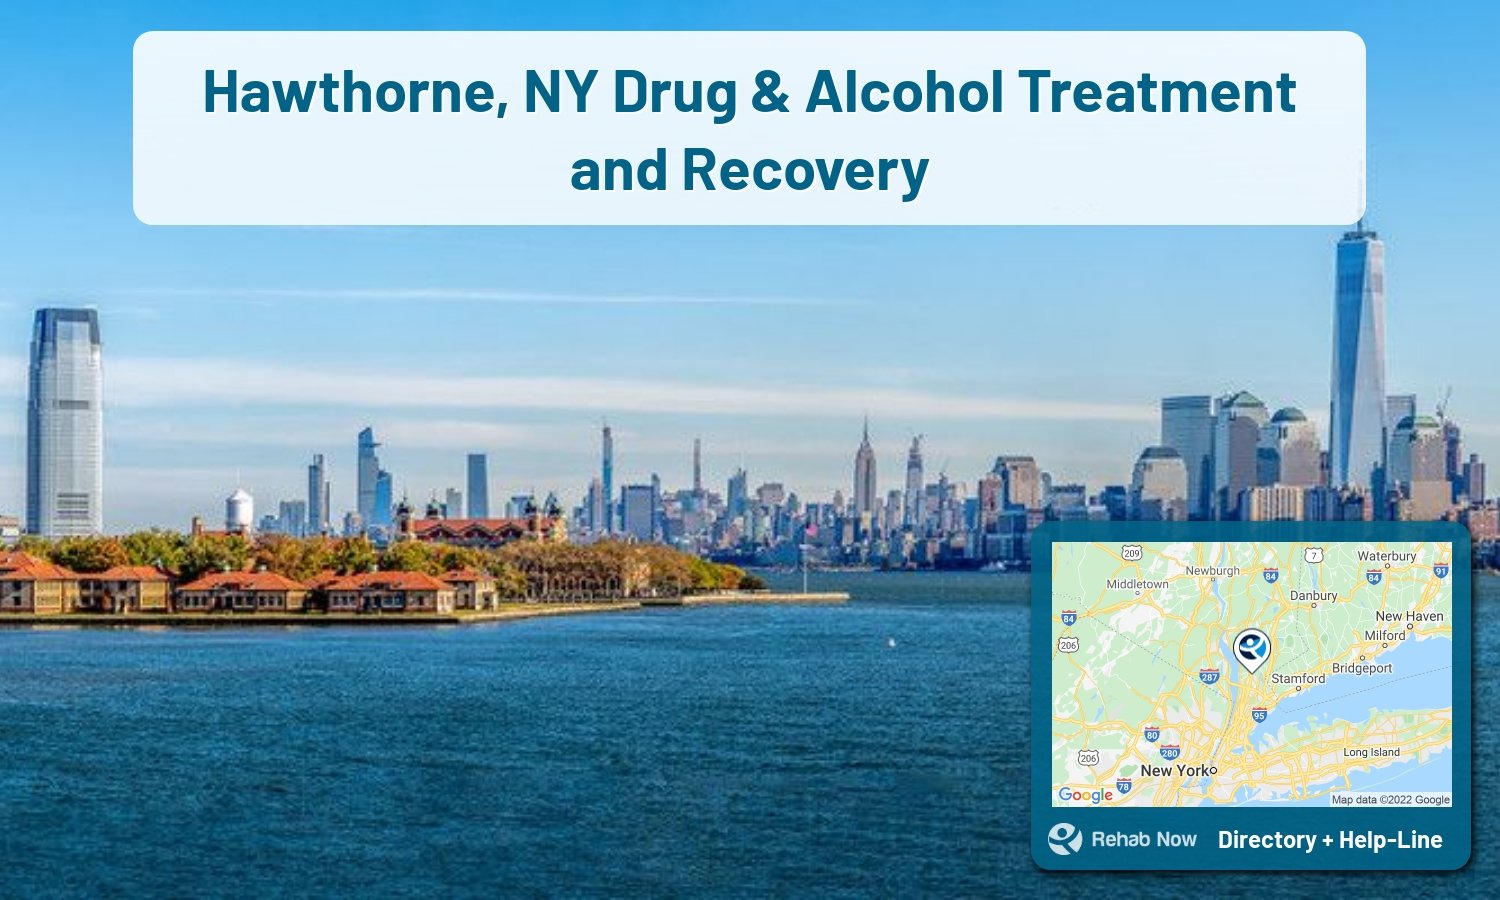 List of alcohol and drug treatment centers near you in Hawthorne, New York. Research certifications, programs, methods, pricing, and more.